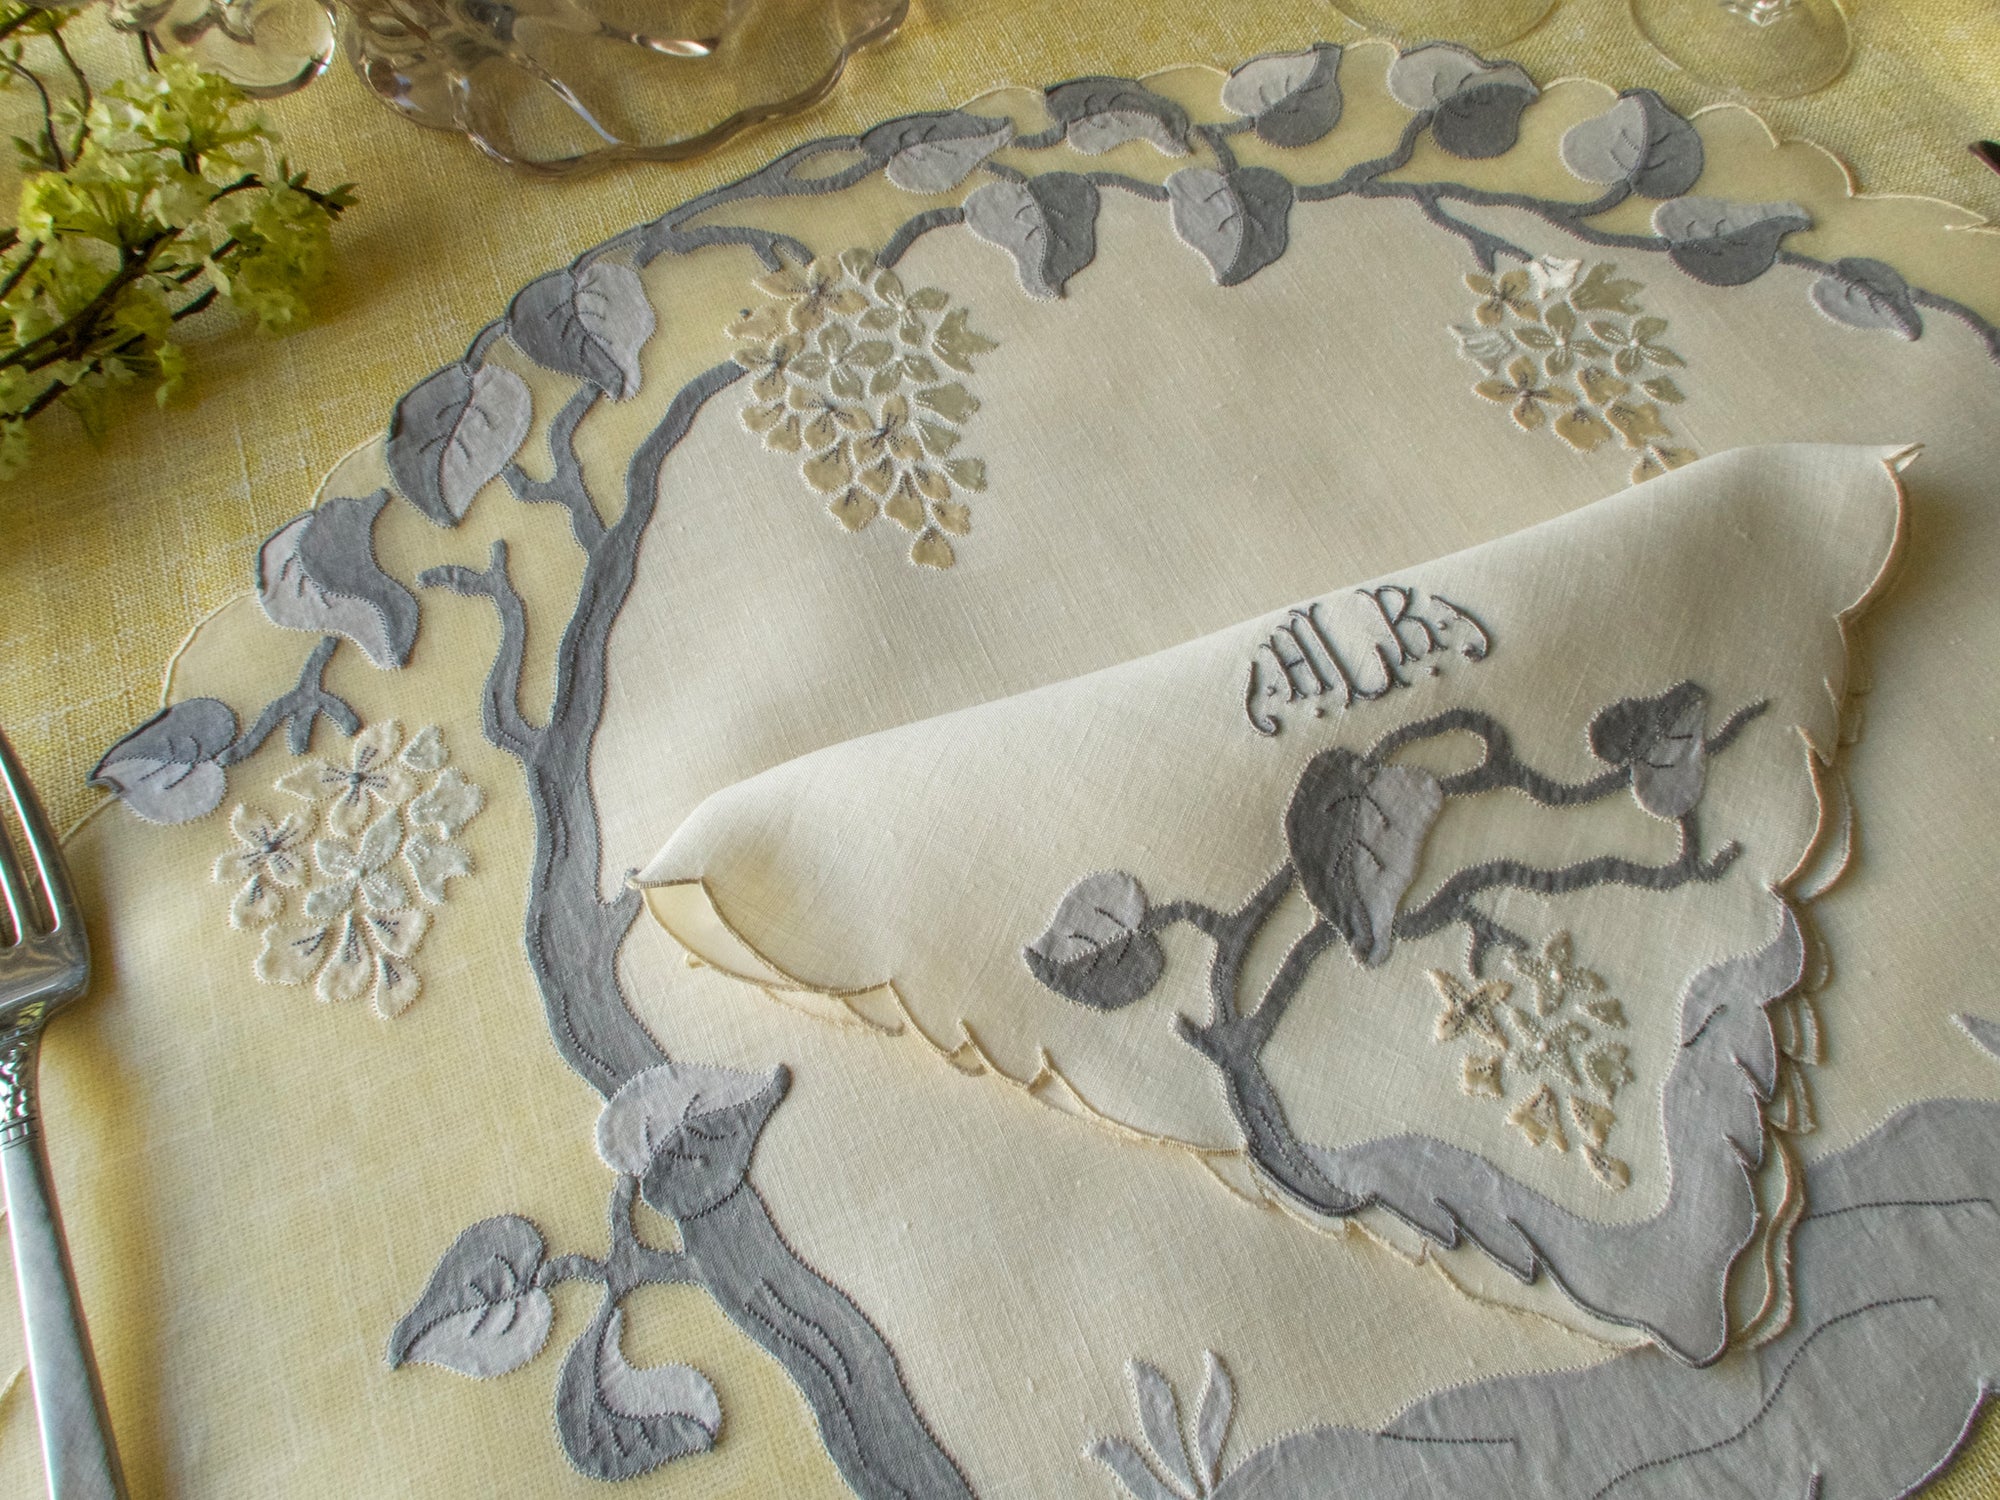 Wisteria Vintage Madeira Linen & Organdy 16pc Placemat Set for 8